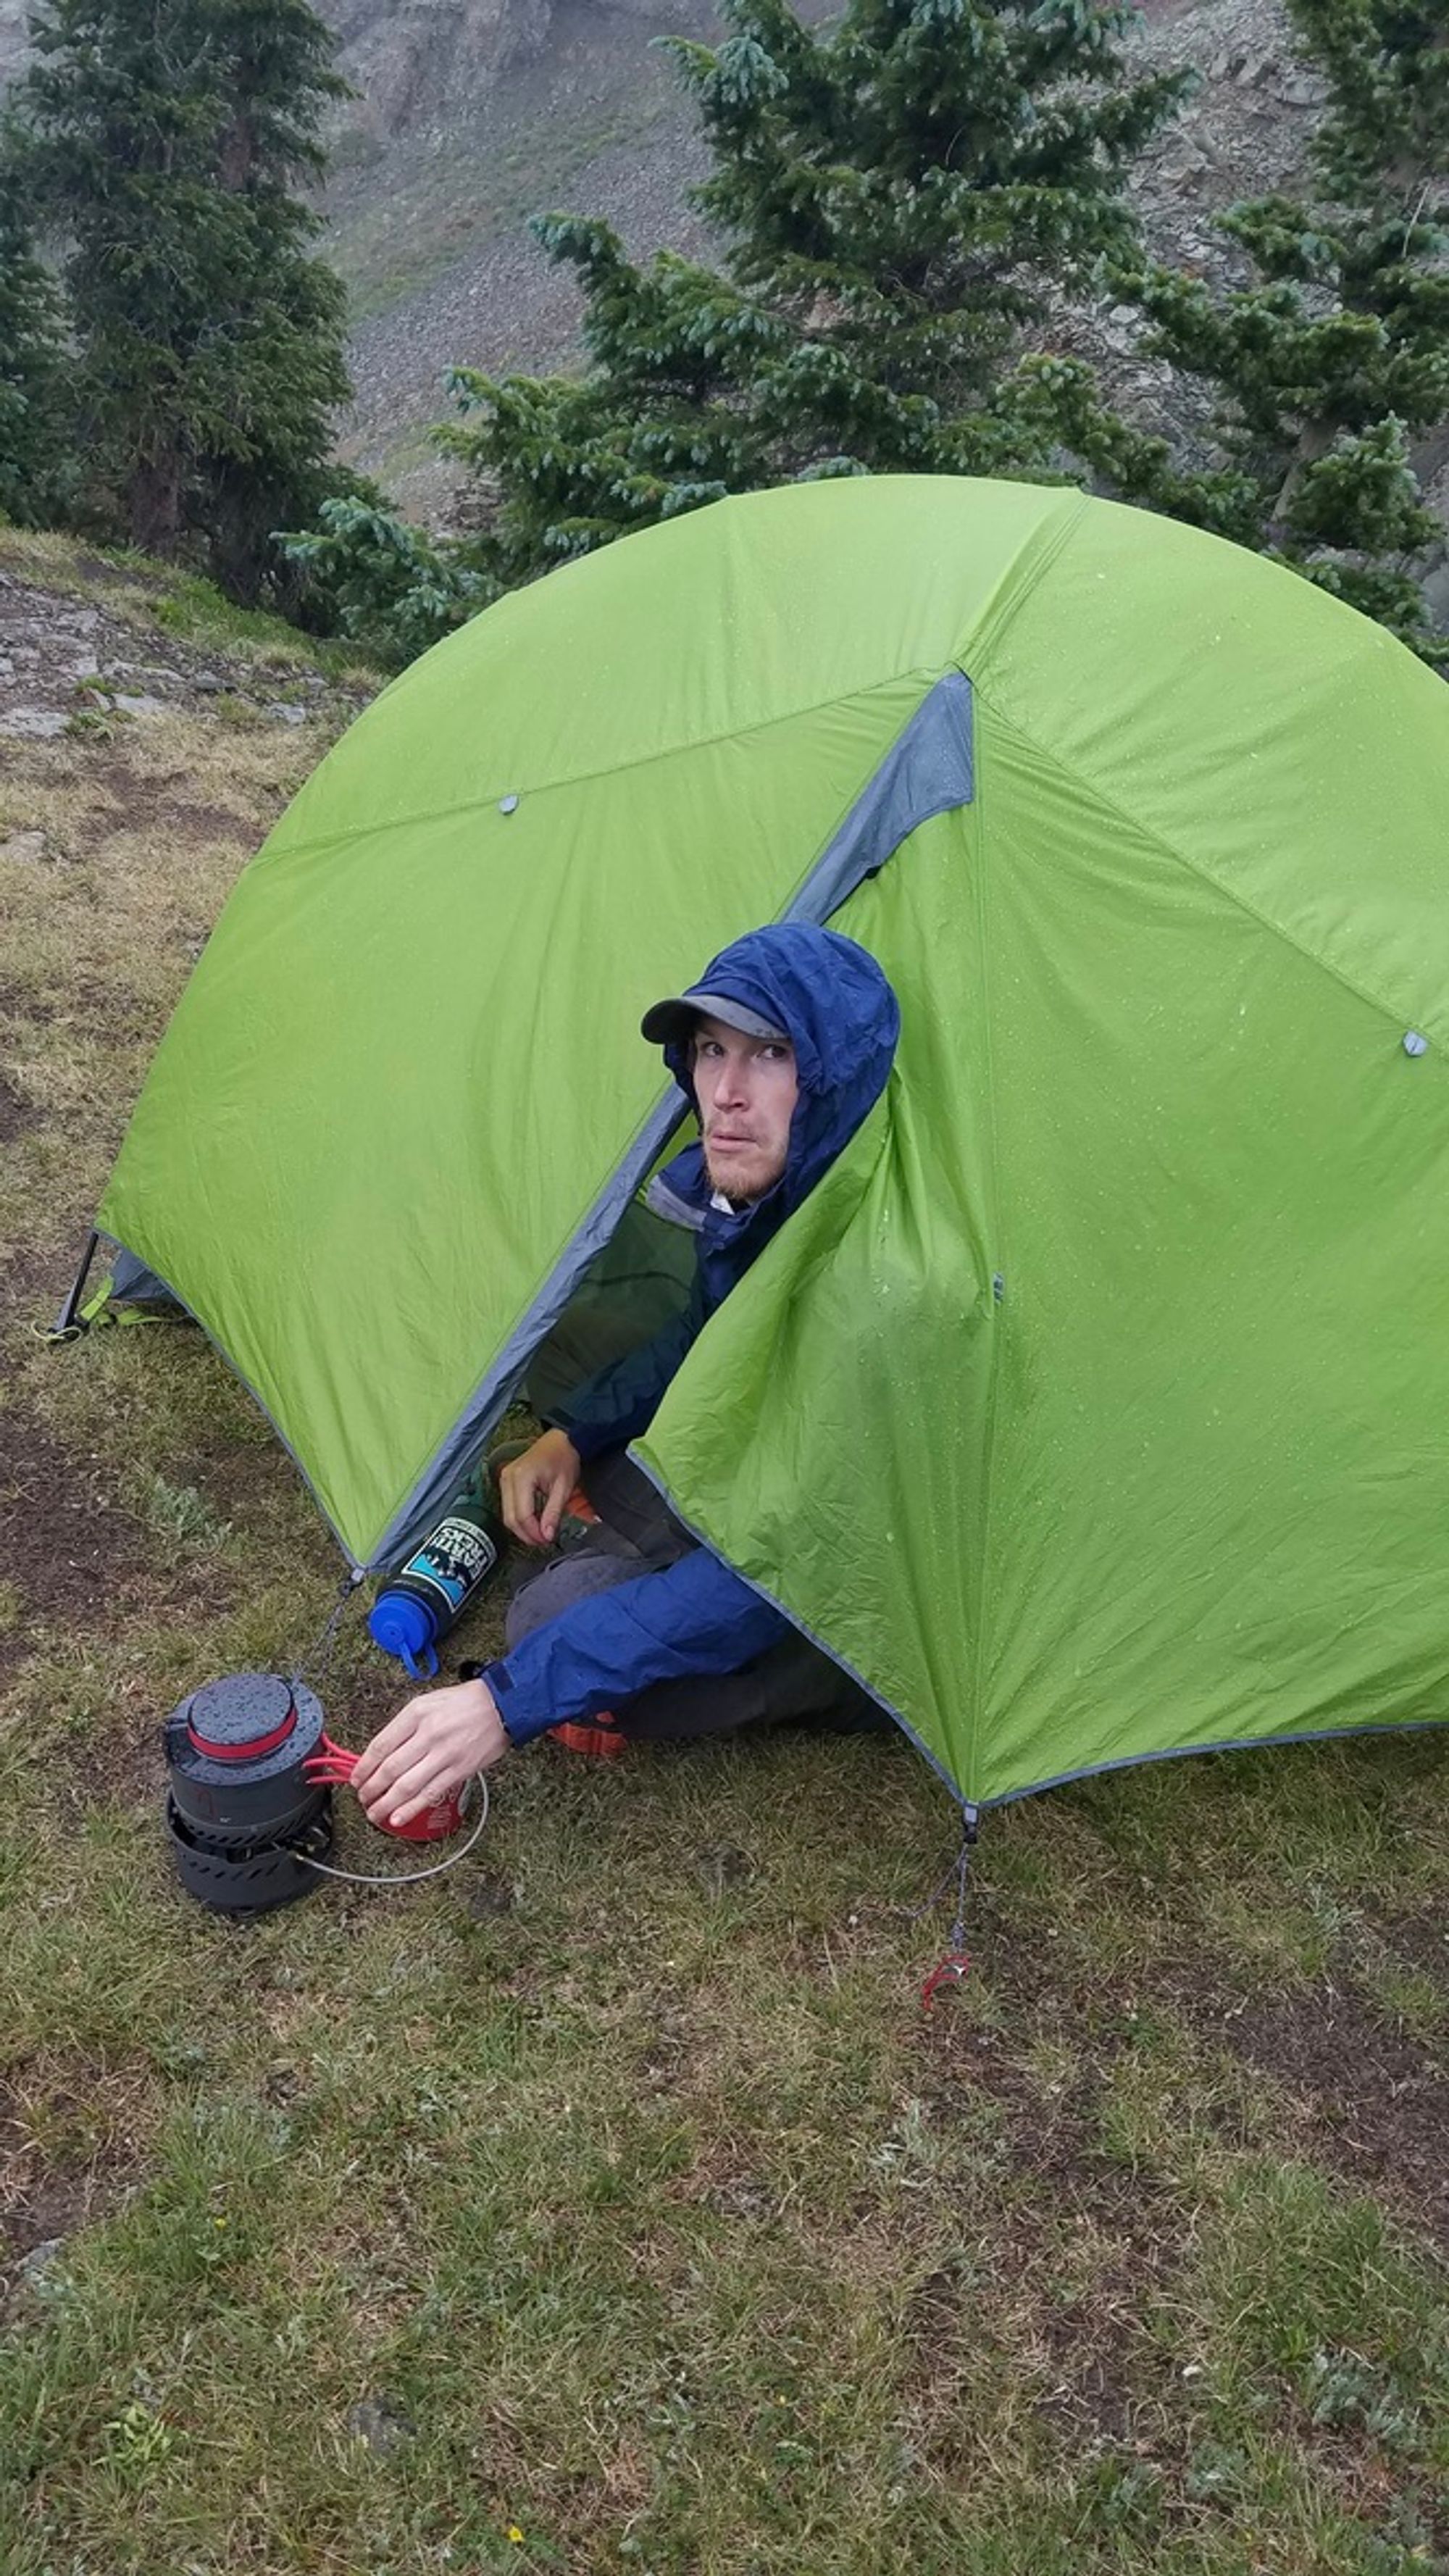 Me, in my raincoat, peaking out of my tent while trying to boil water in the rain/hail - my face is jokingly distraught.